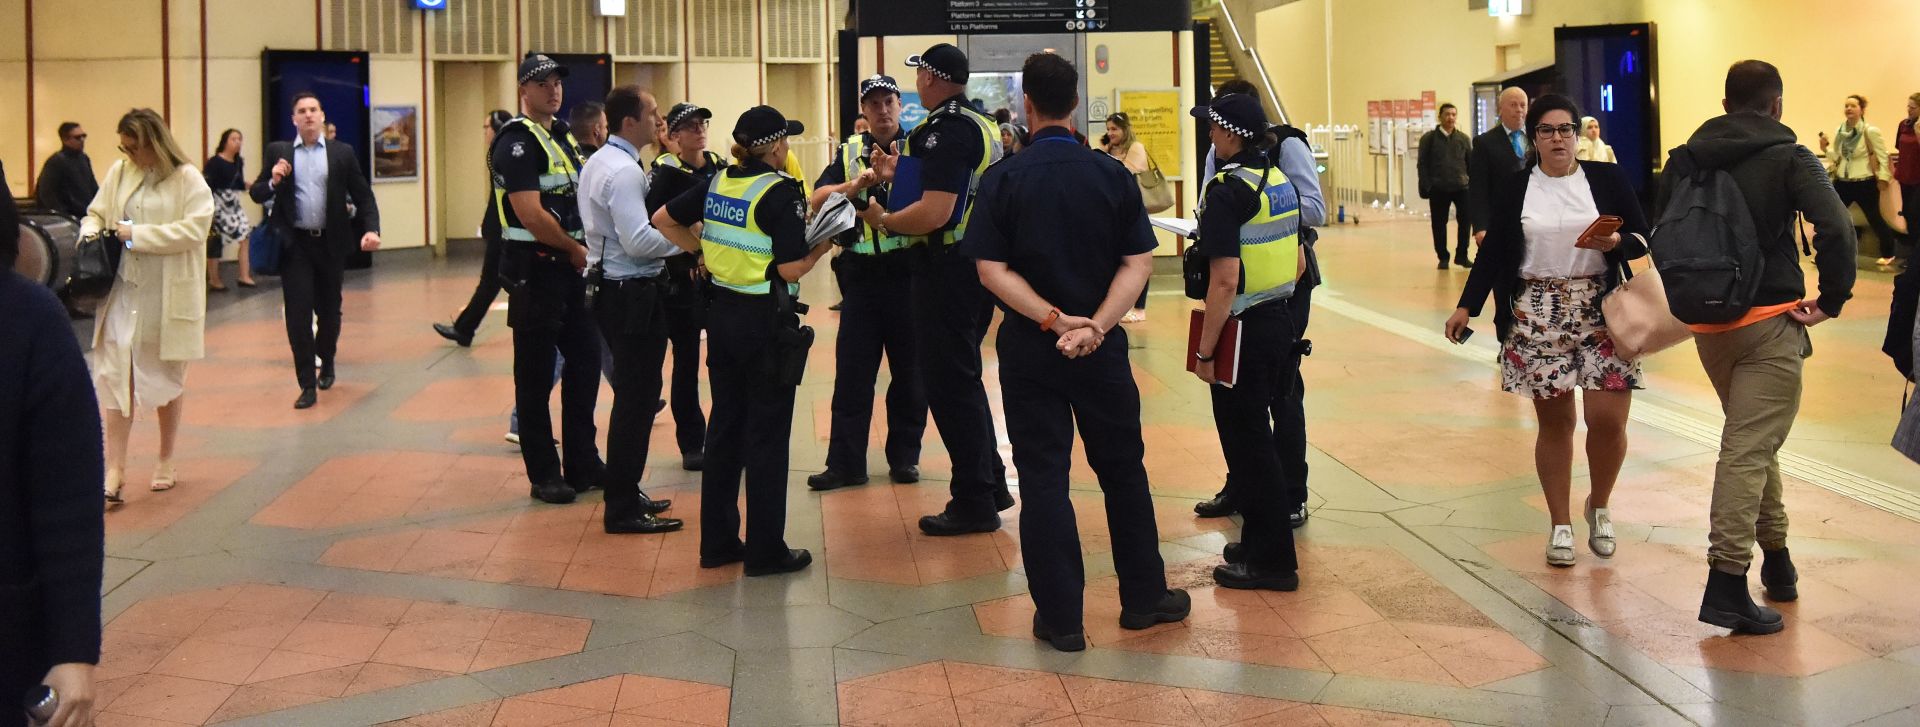 epa07467838 Victorian Police officers stand inside Flagstaff train station in Melbourne, Australia, 28 March 2019. A Melbourne train station has been given the all-clear after earlier reports of a person with a gun forced it to be shut down.  EPA/JAMES ROSS AUSTRALIA AND NEW ZEALAND OUT